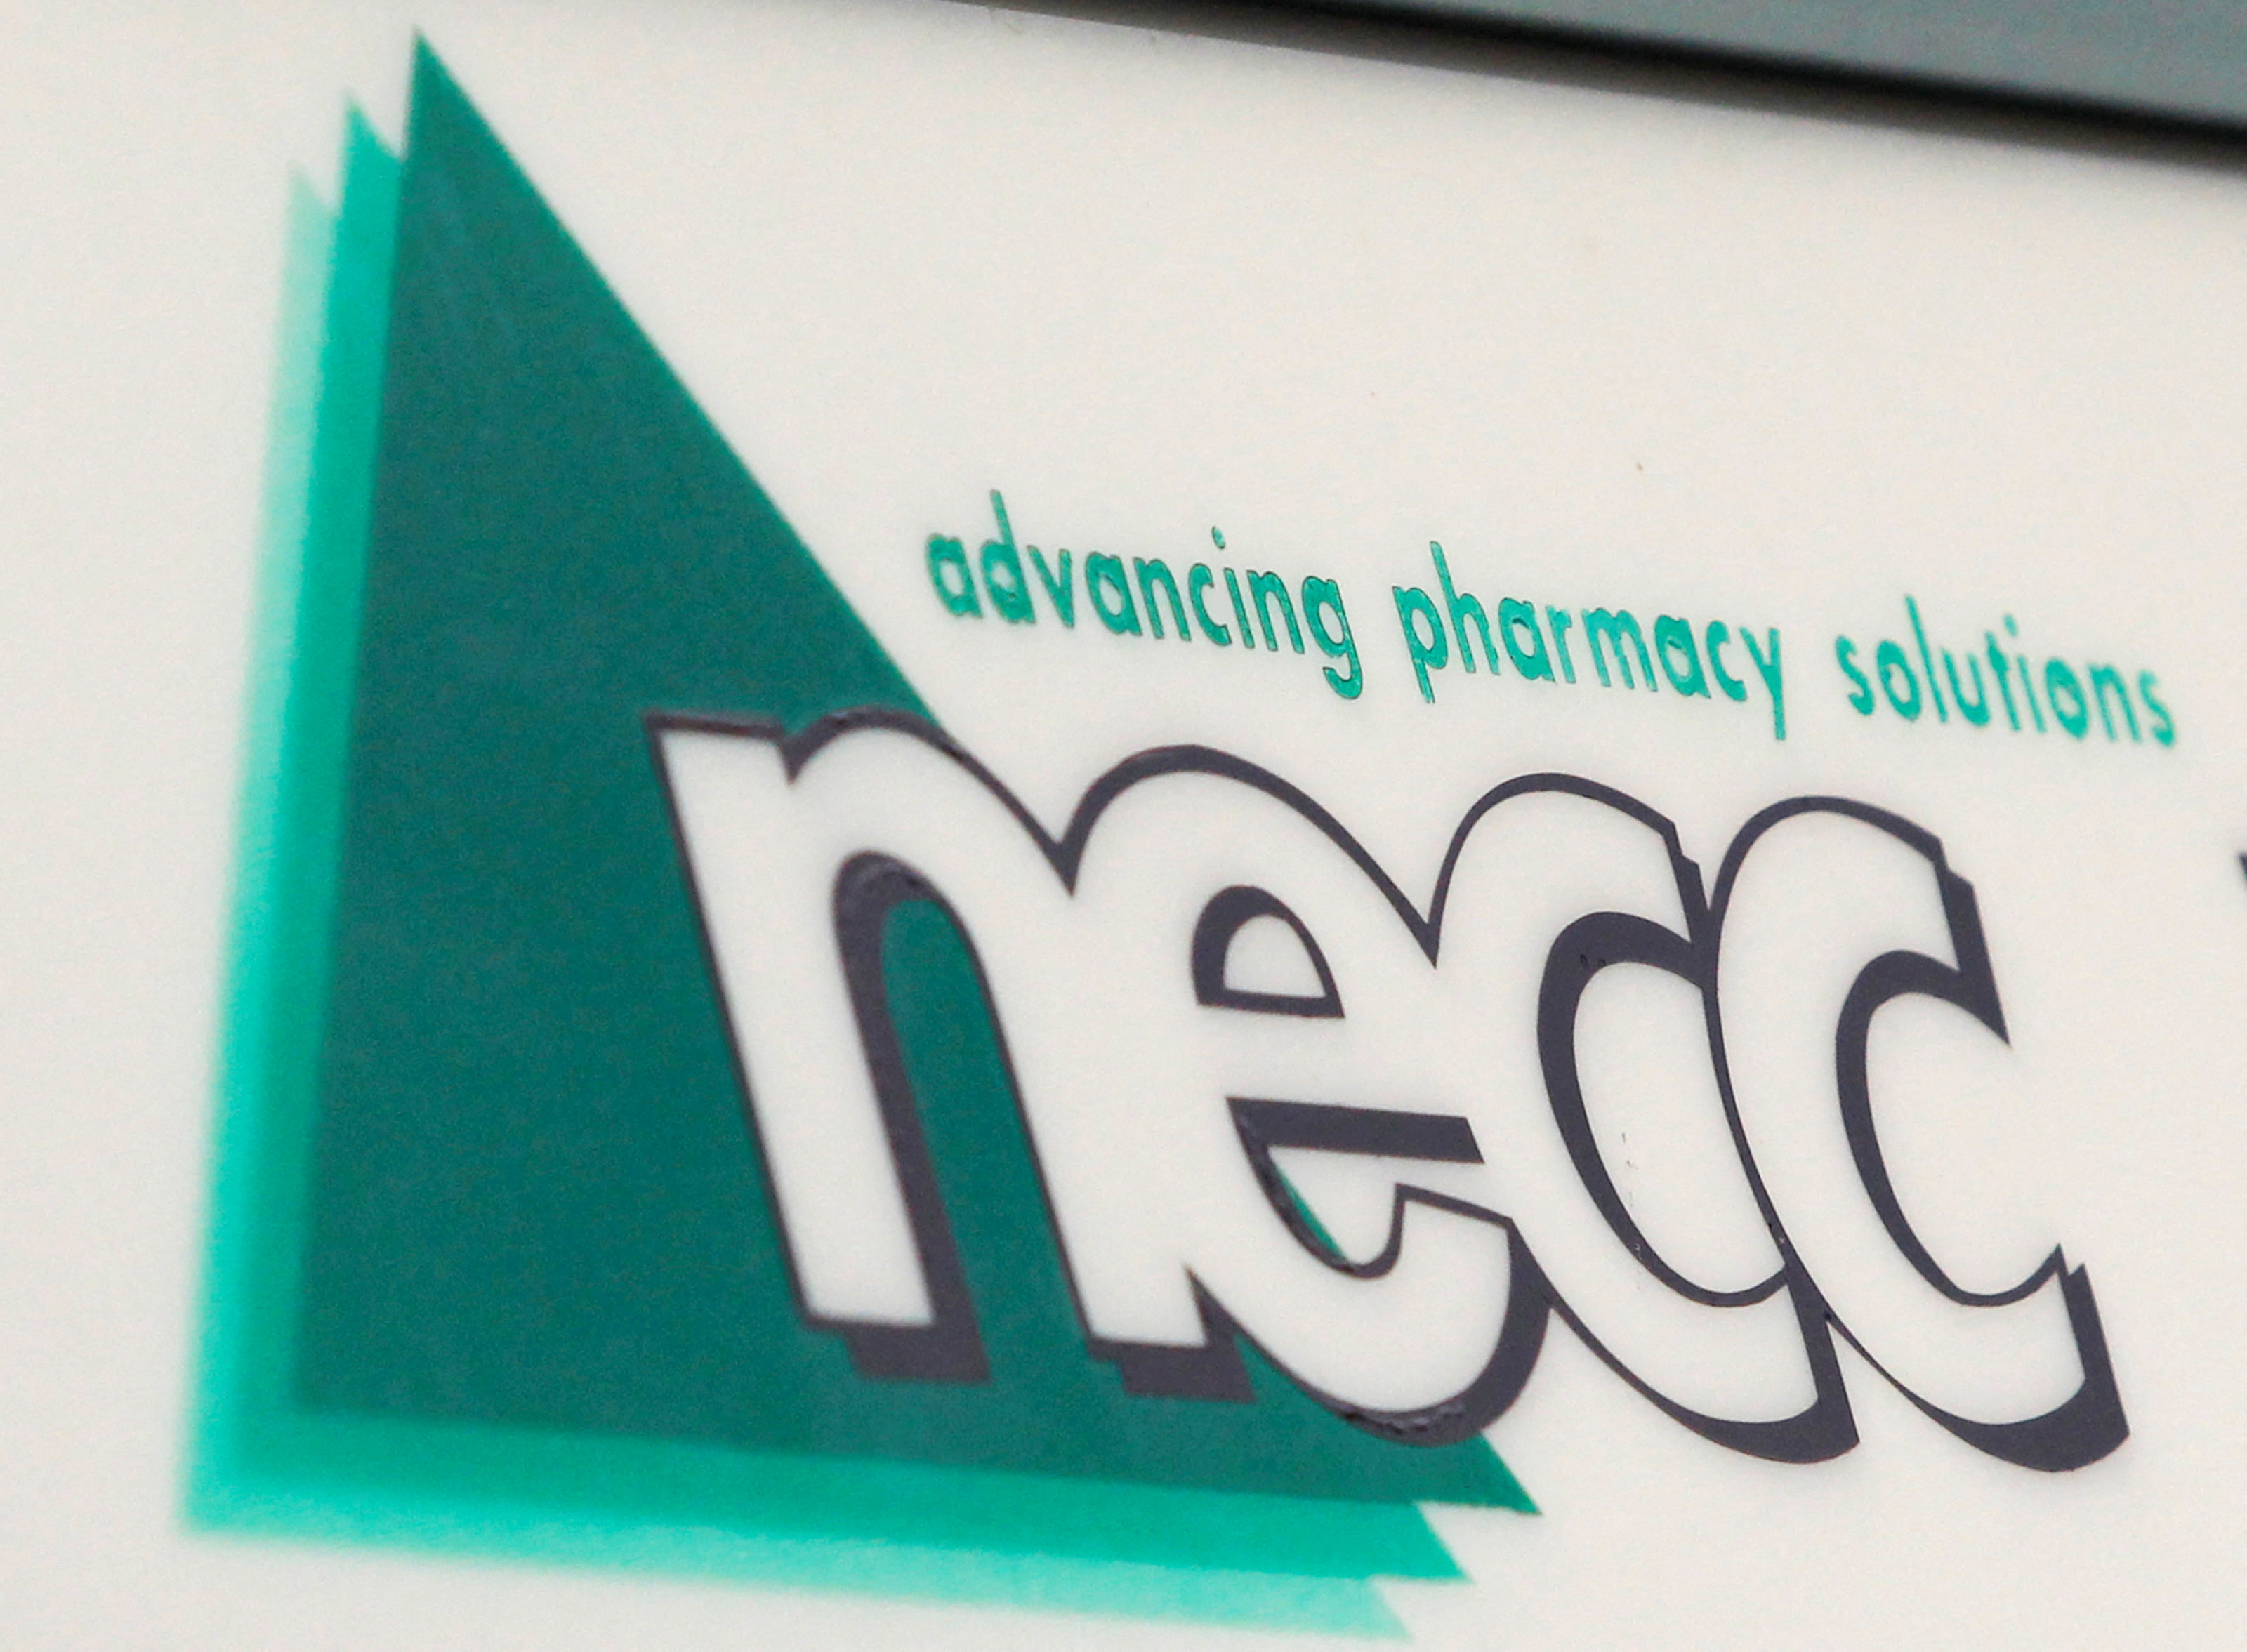 A sign for pharmaceutical compounding company NECC, a producer of the steroid methylprednisolone acetate, is seen in Framingham, Massachusetts